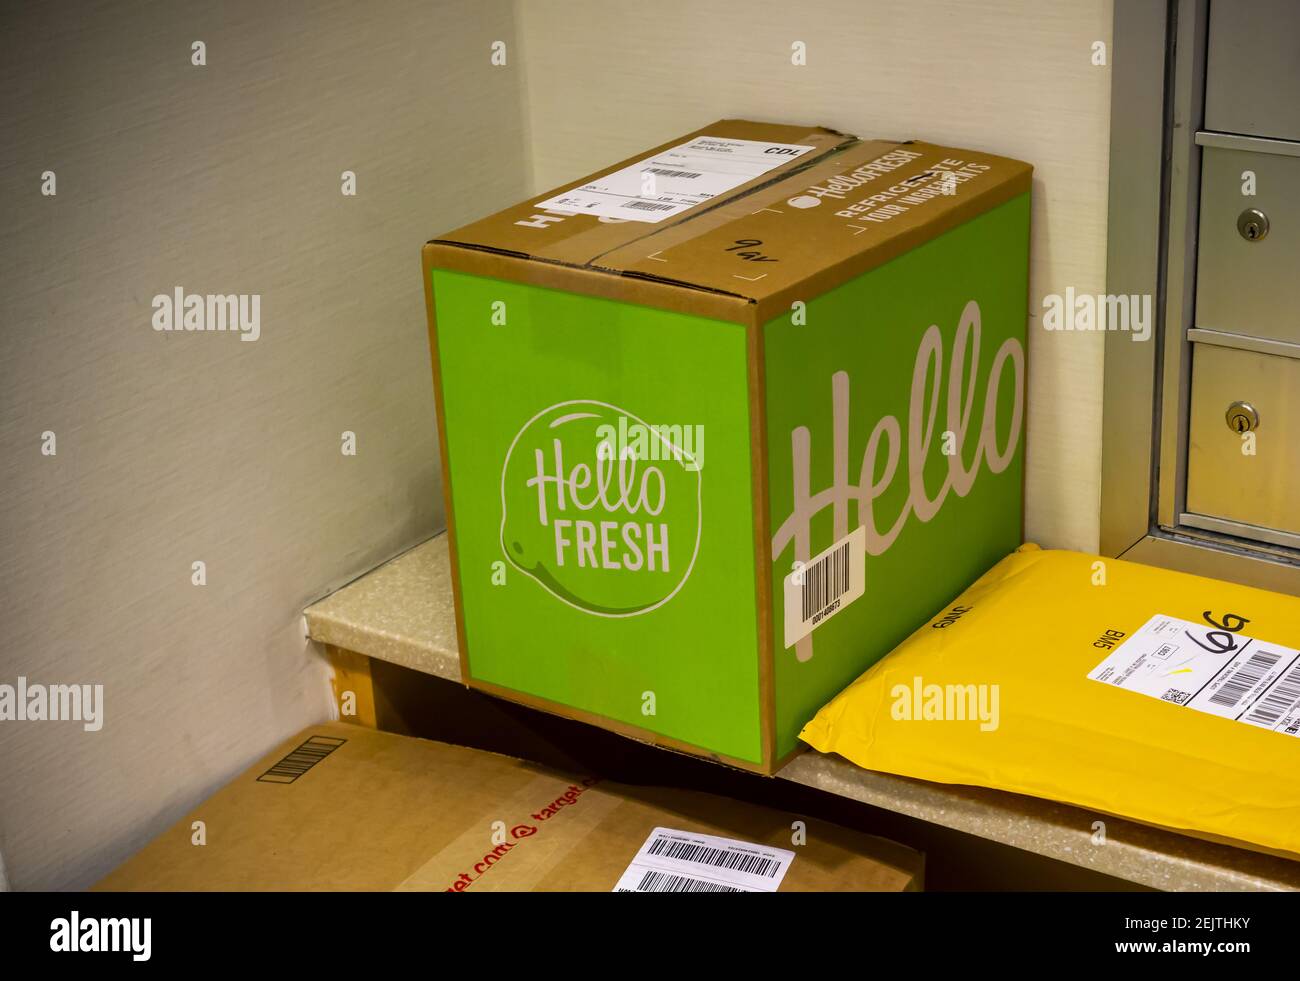 A delivery from the Hello Fresh meal subscription service waits to be picked up in the lobby of an apartment building in New York on Saturday, March 7, 2020. (ÂPhoto by Richard B. Levine) Stock Photo